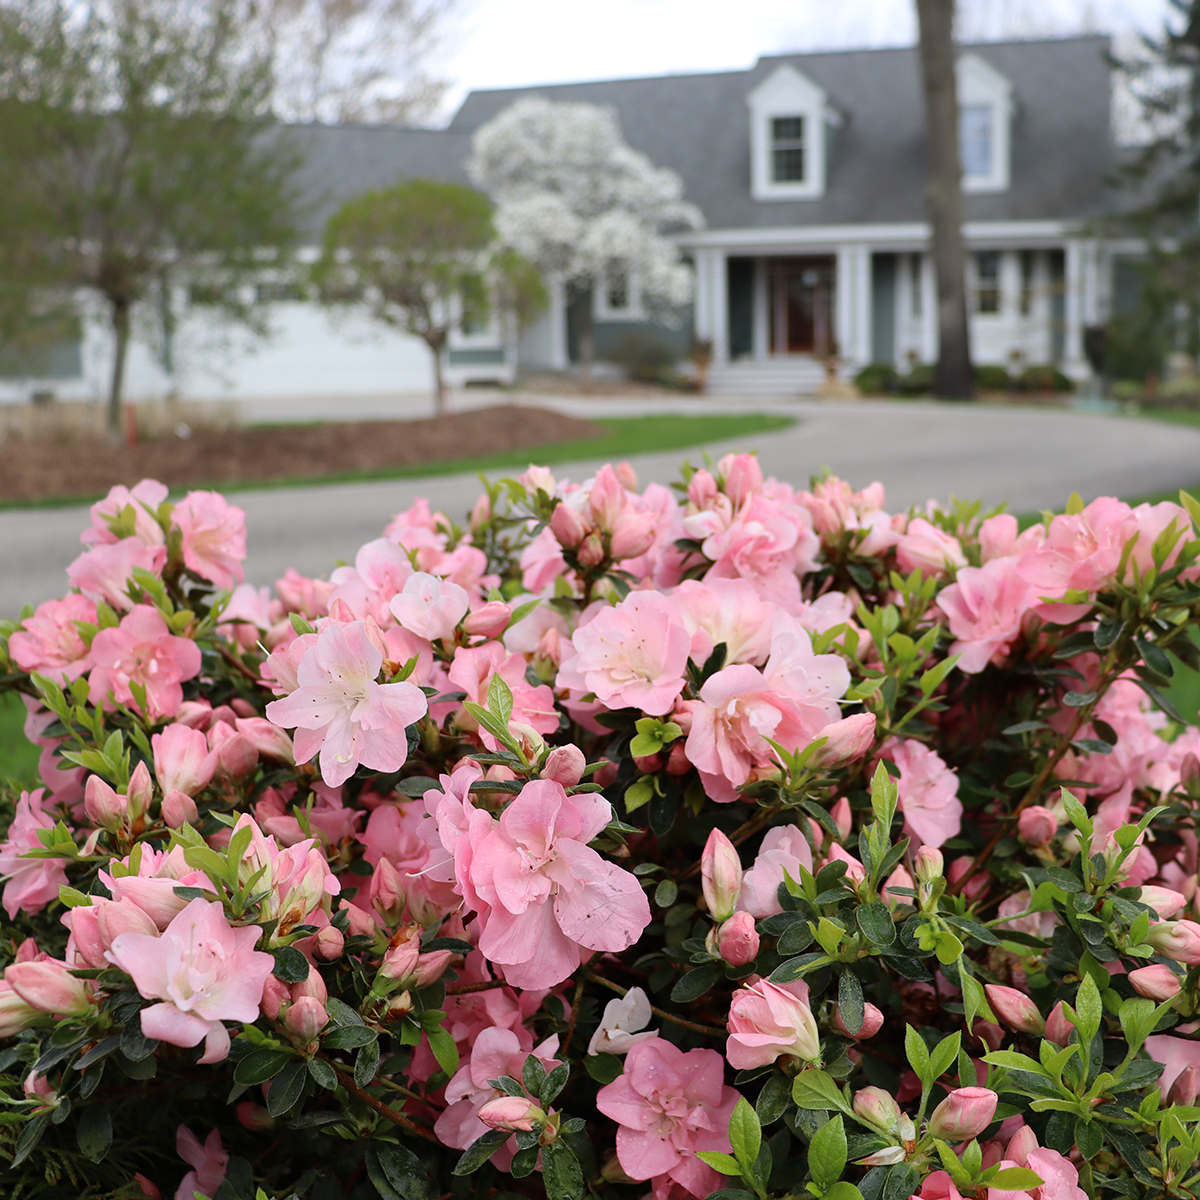 Perfecto Mundo Epic Pink azalea blooming in front of a house in spring.